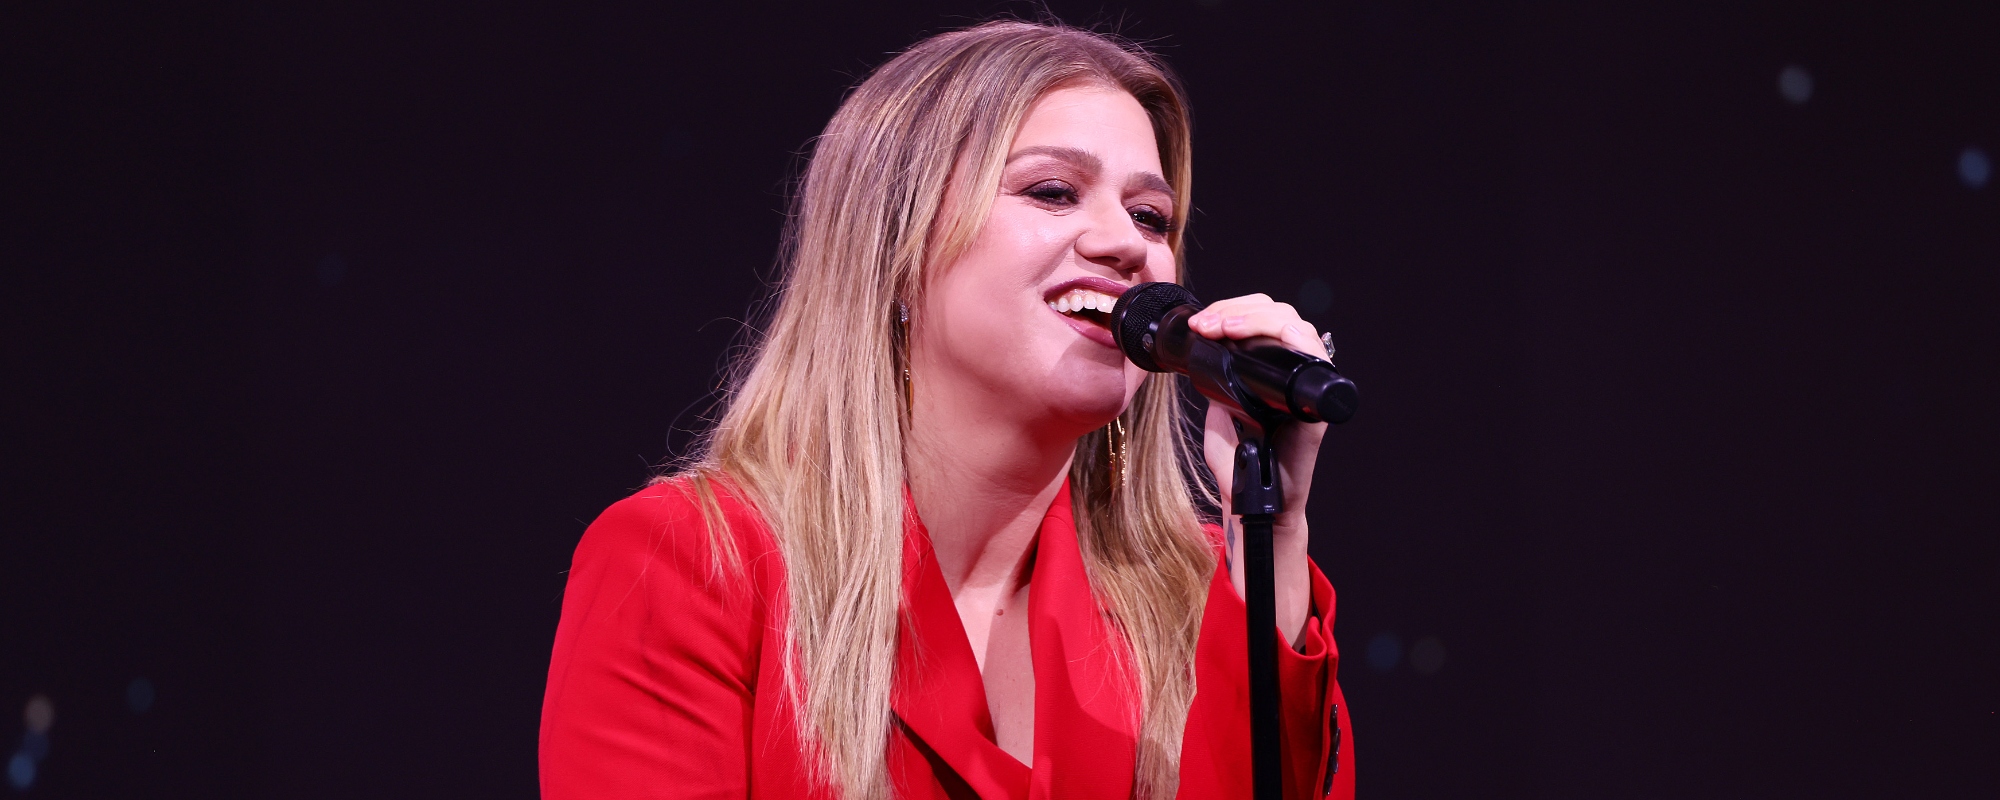 3 of Kelly Clarkson’s Favorite Songs to Cover